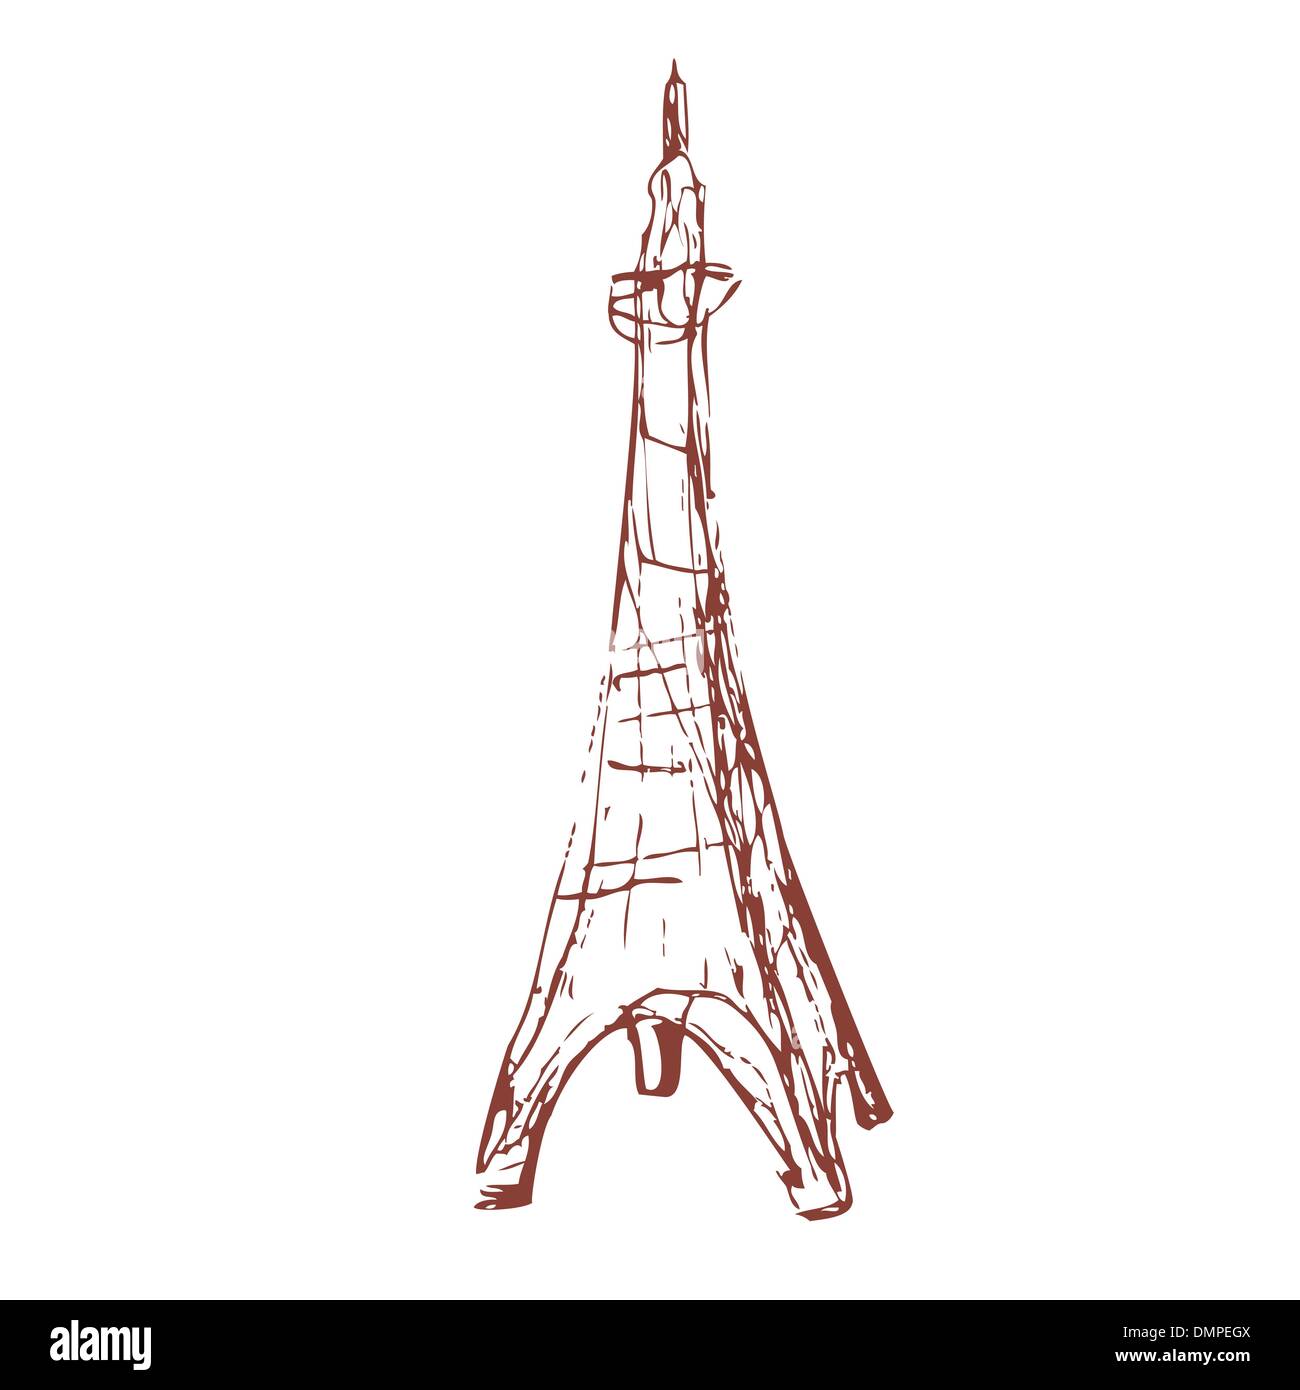 How to draw the Eiffel Tower ? - The Eiffel Tower